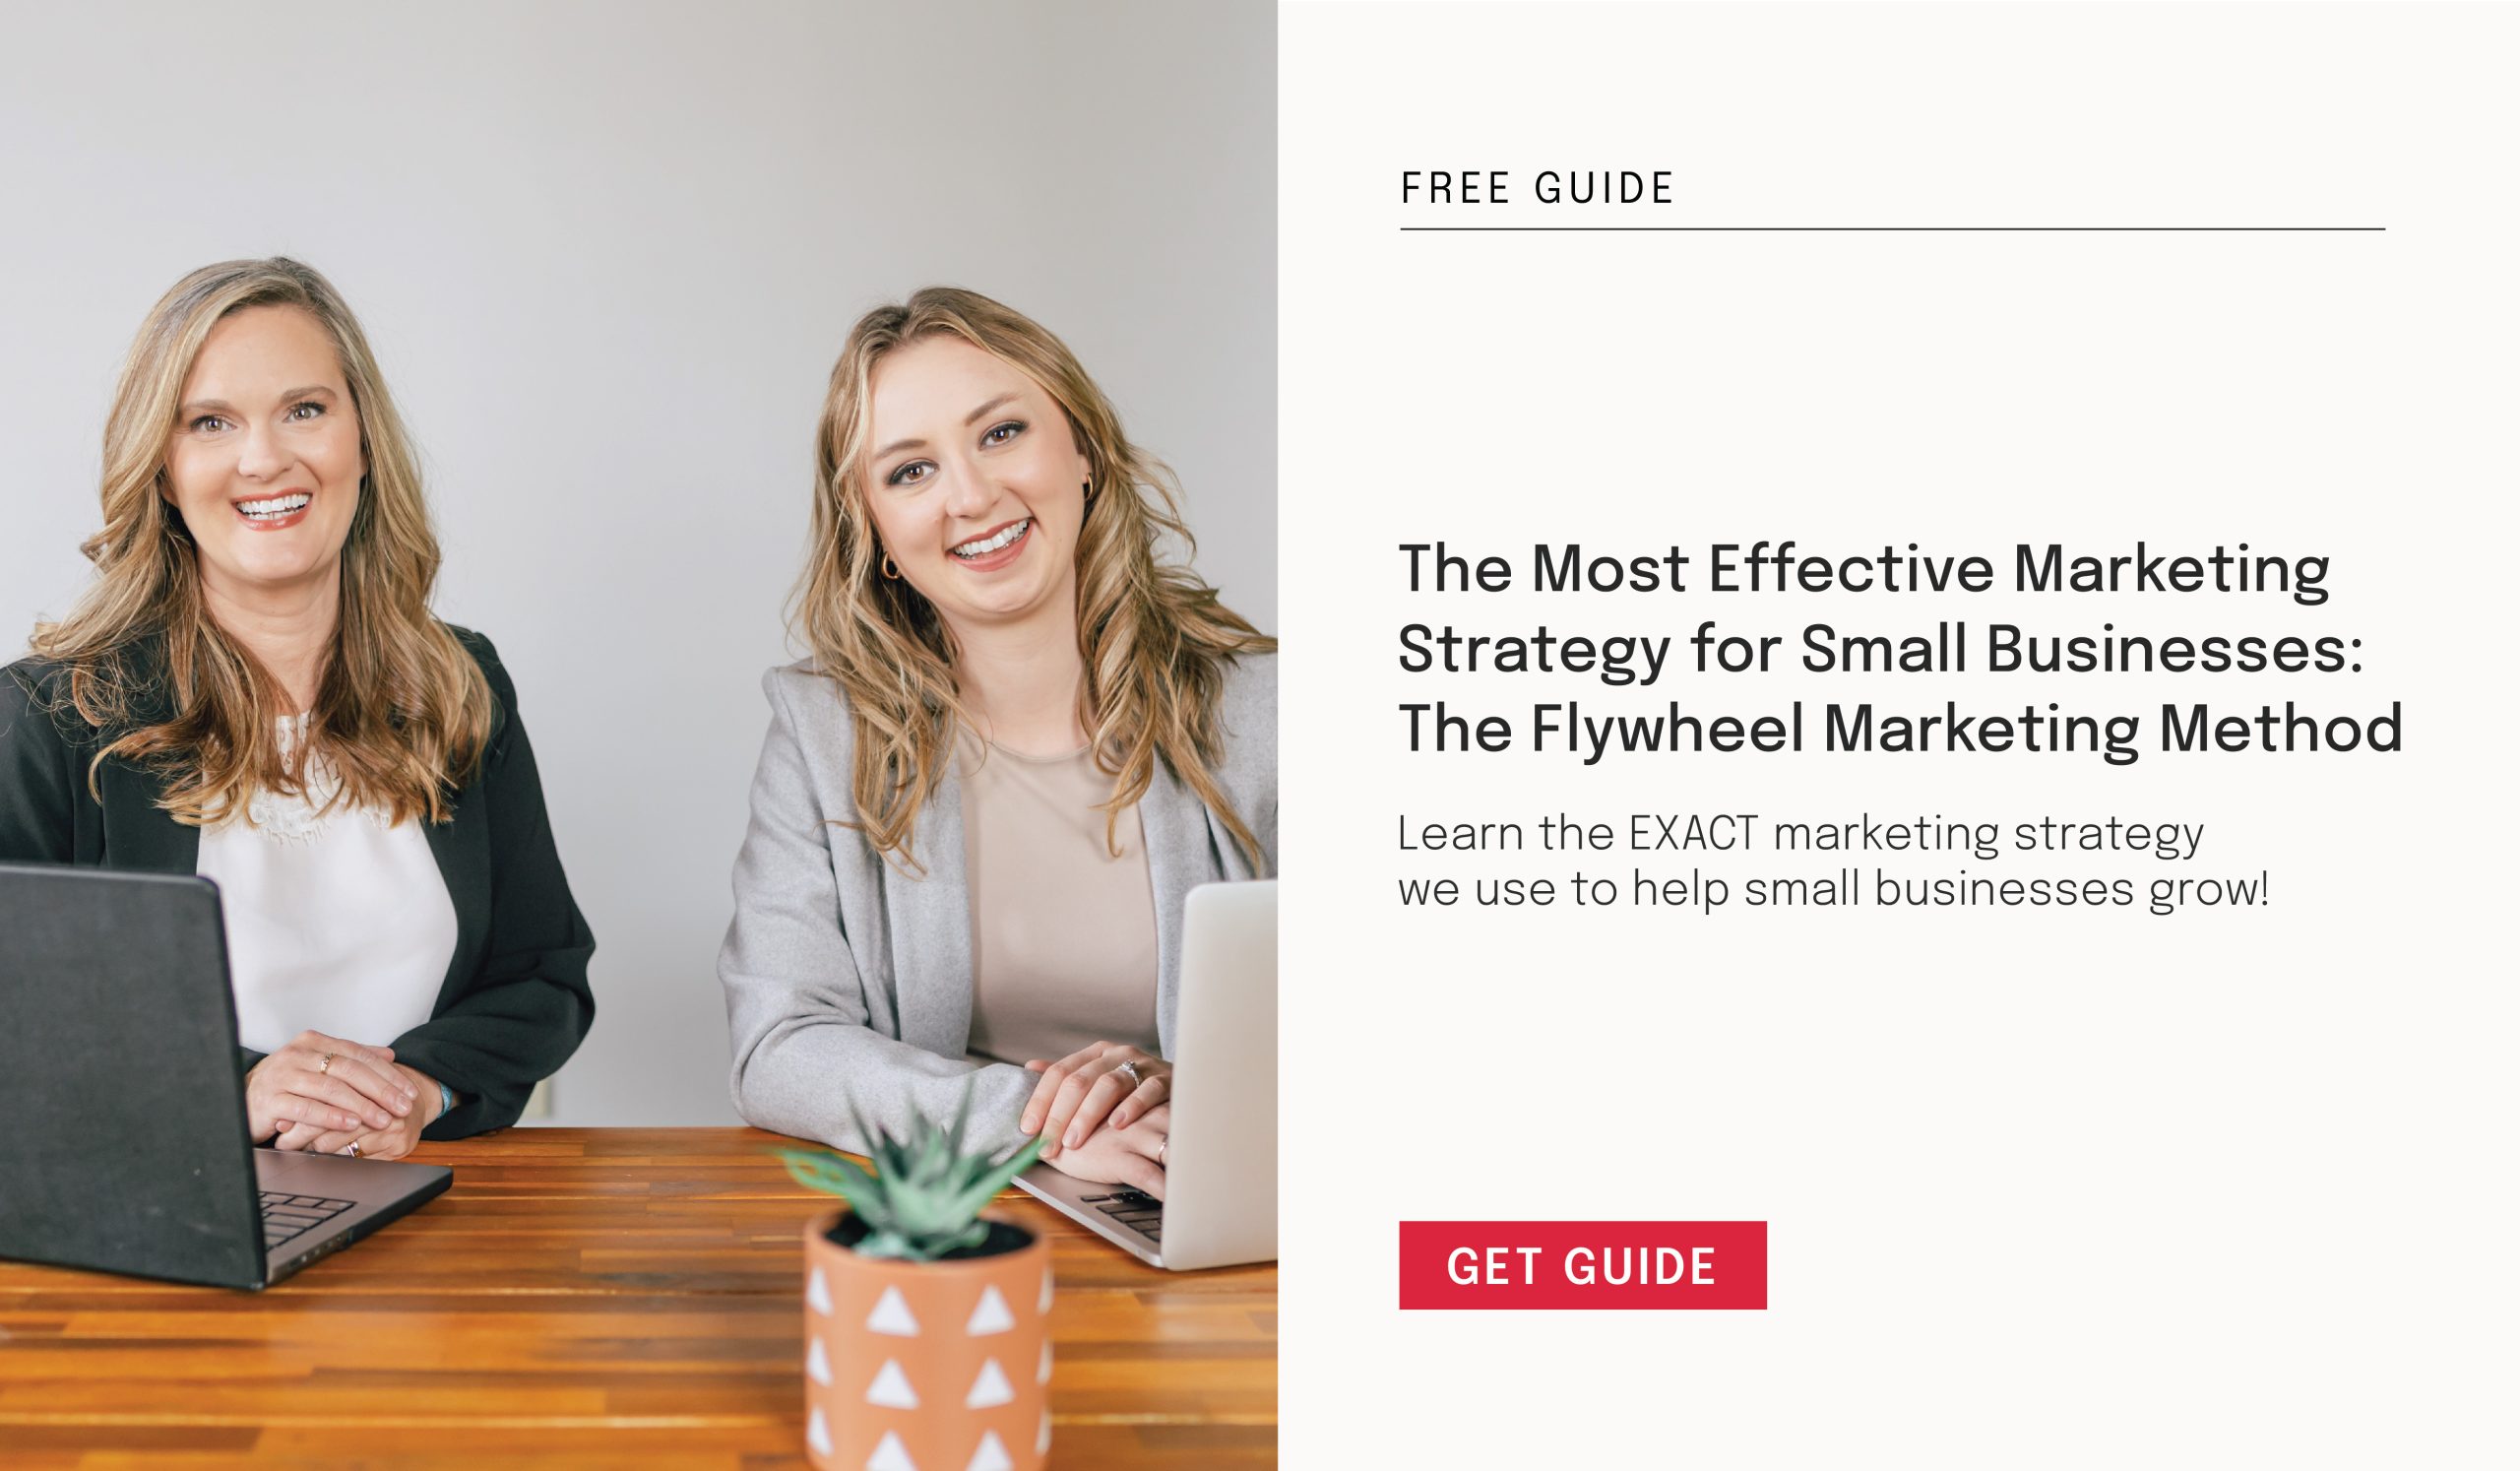 Learn the EXACT marketing strategy we use to help small businesses grow: The Flywheel Marketing Method.